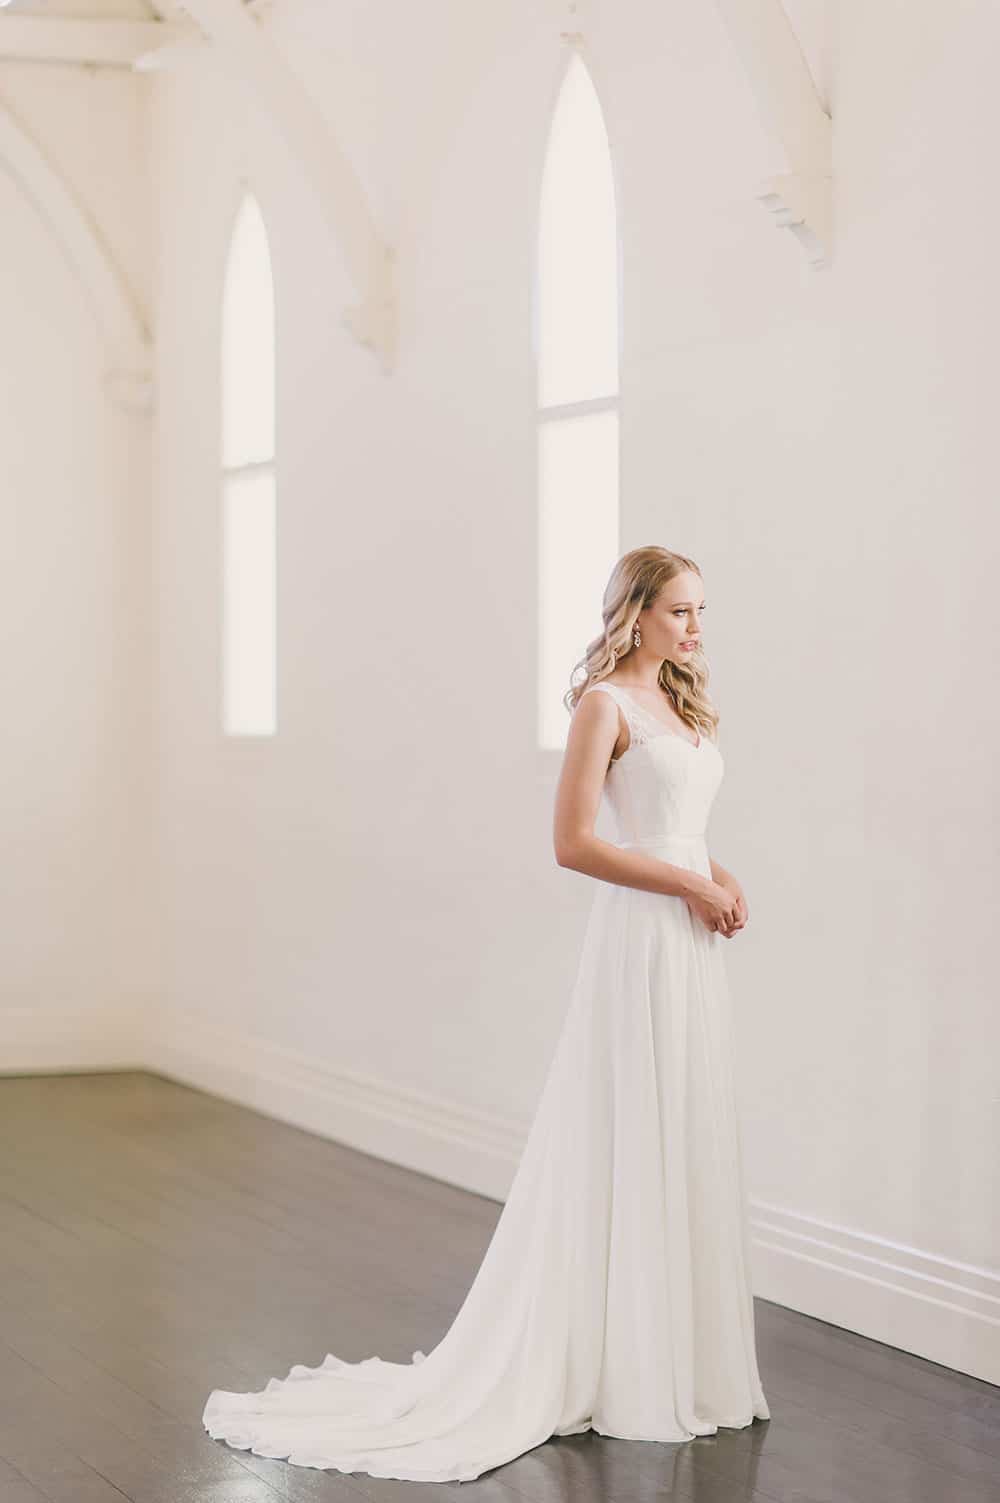 The Kiara wedding gown from Wendy Makin's Ready to Wear collection